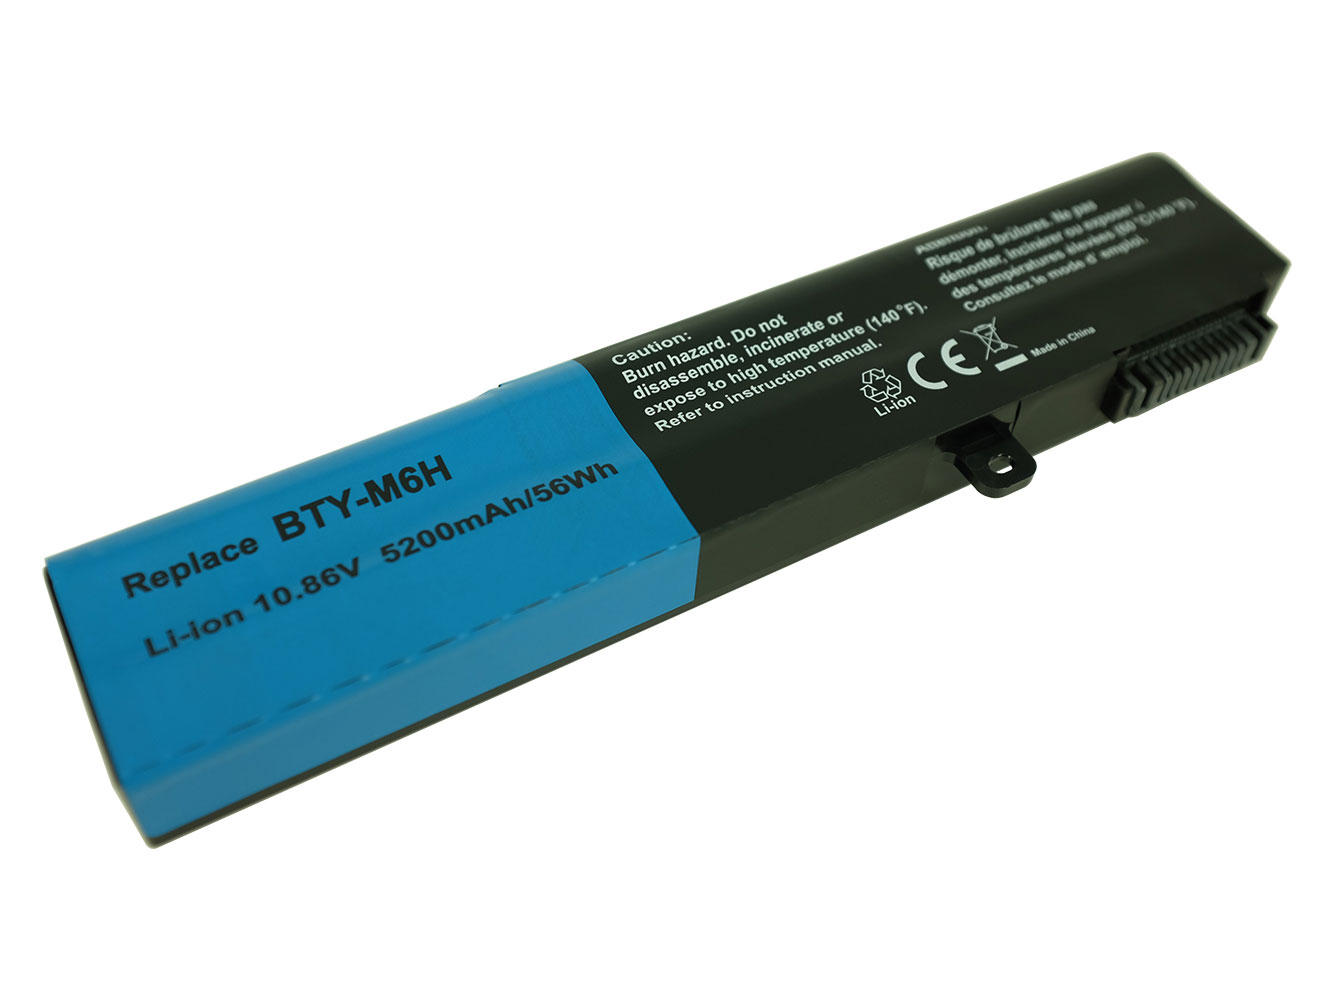 3ICR19/65-2, 3ICR19/66-2 replacement Laptop Battery for MSI GE62, GE63, 5200mAh, 10.86V